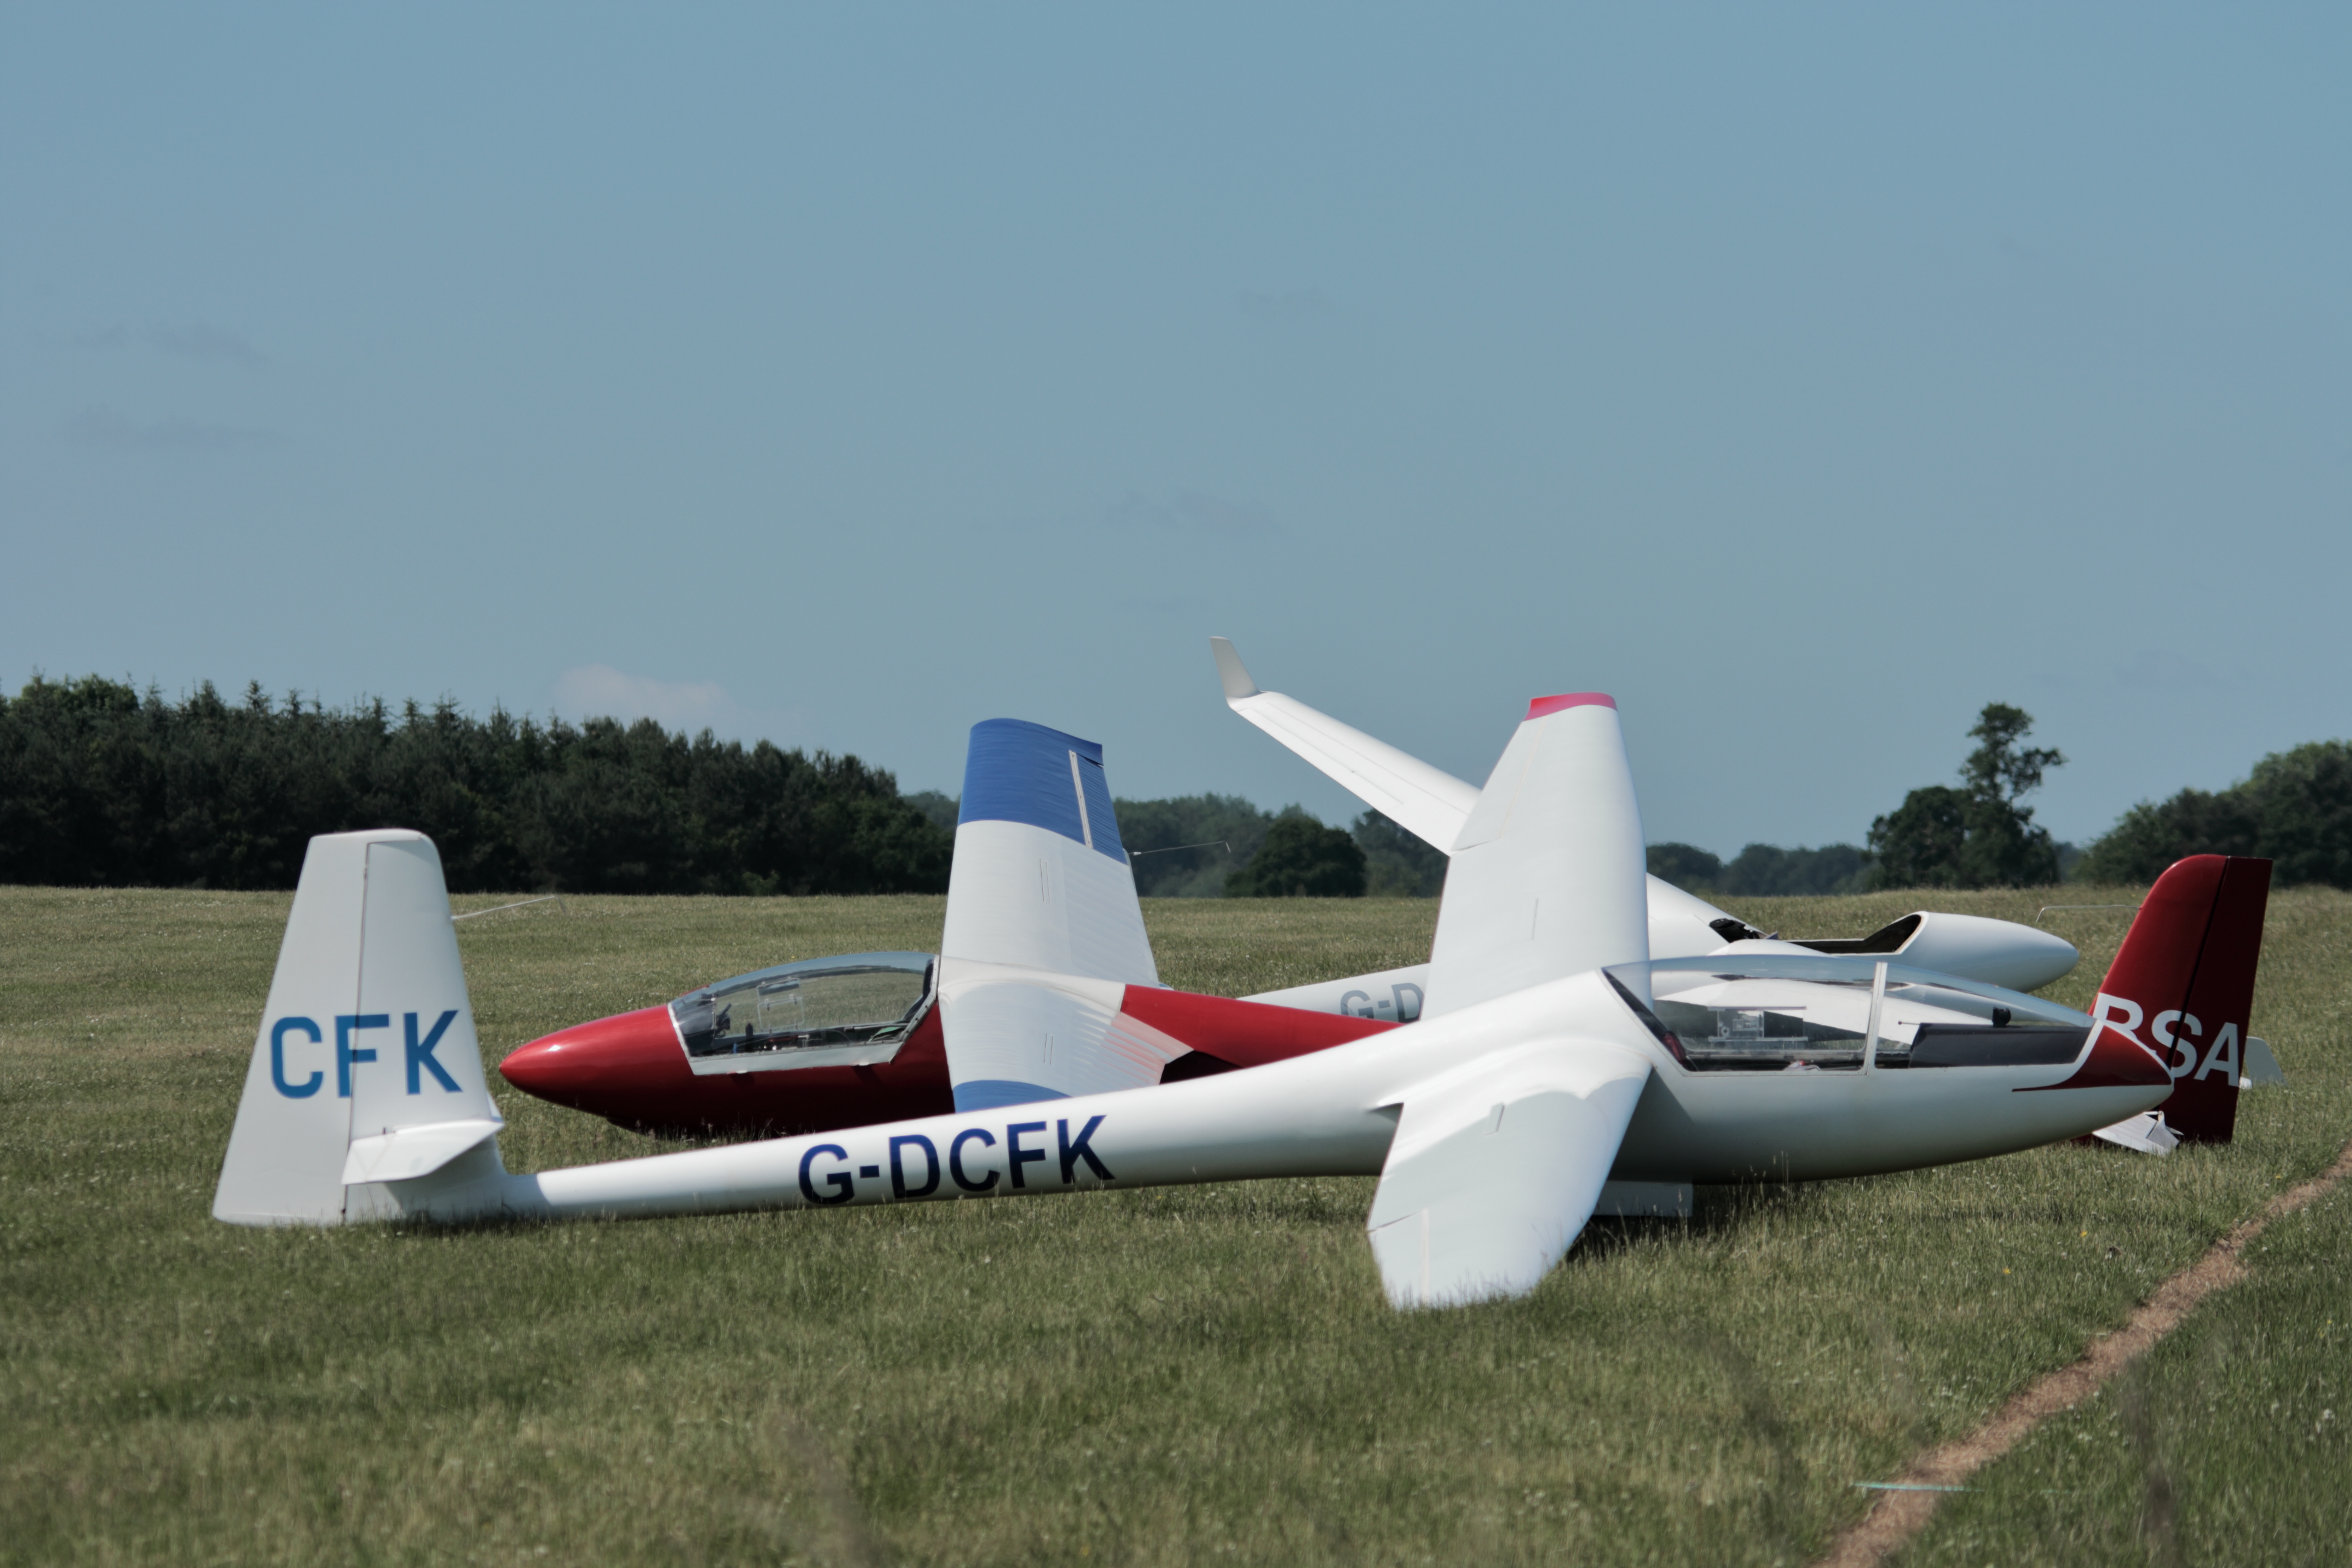 image od gliders at rest on a grass airfield